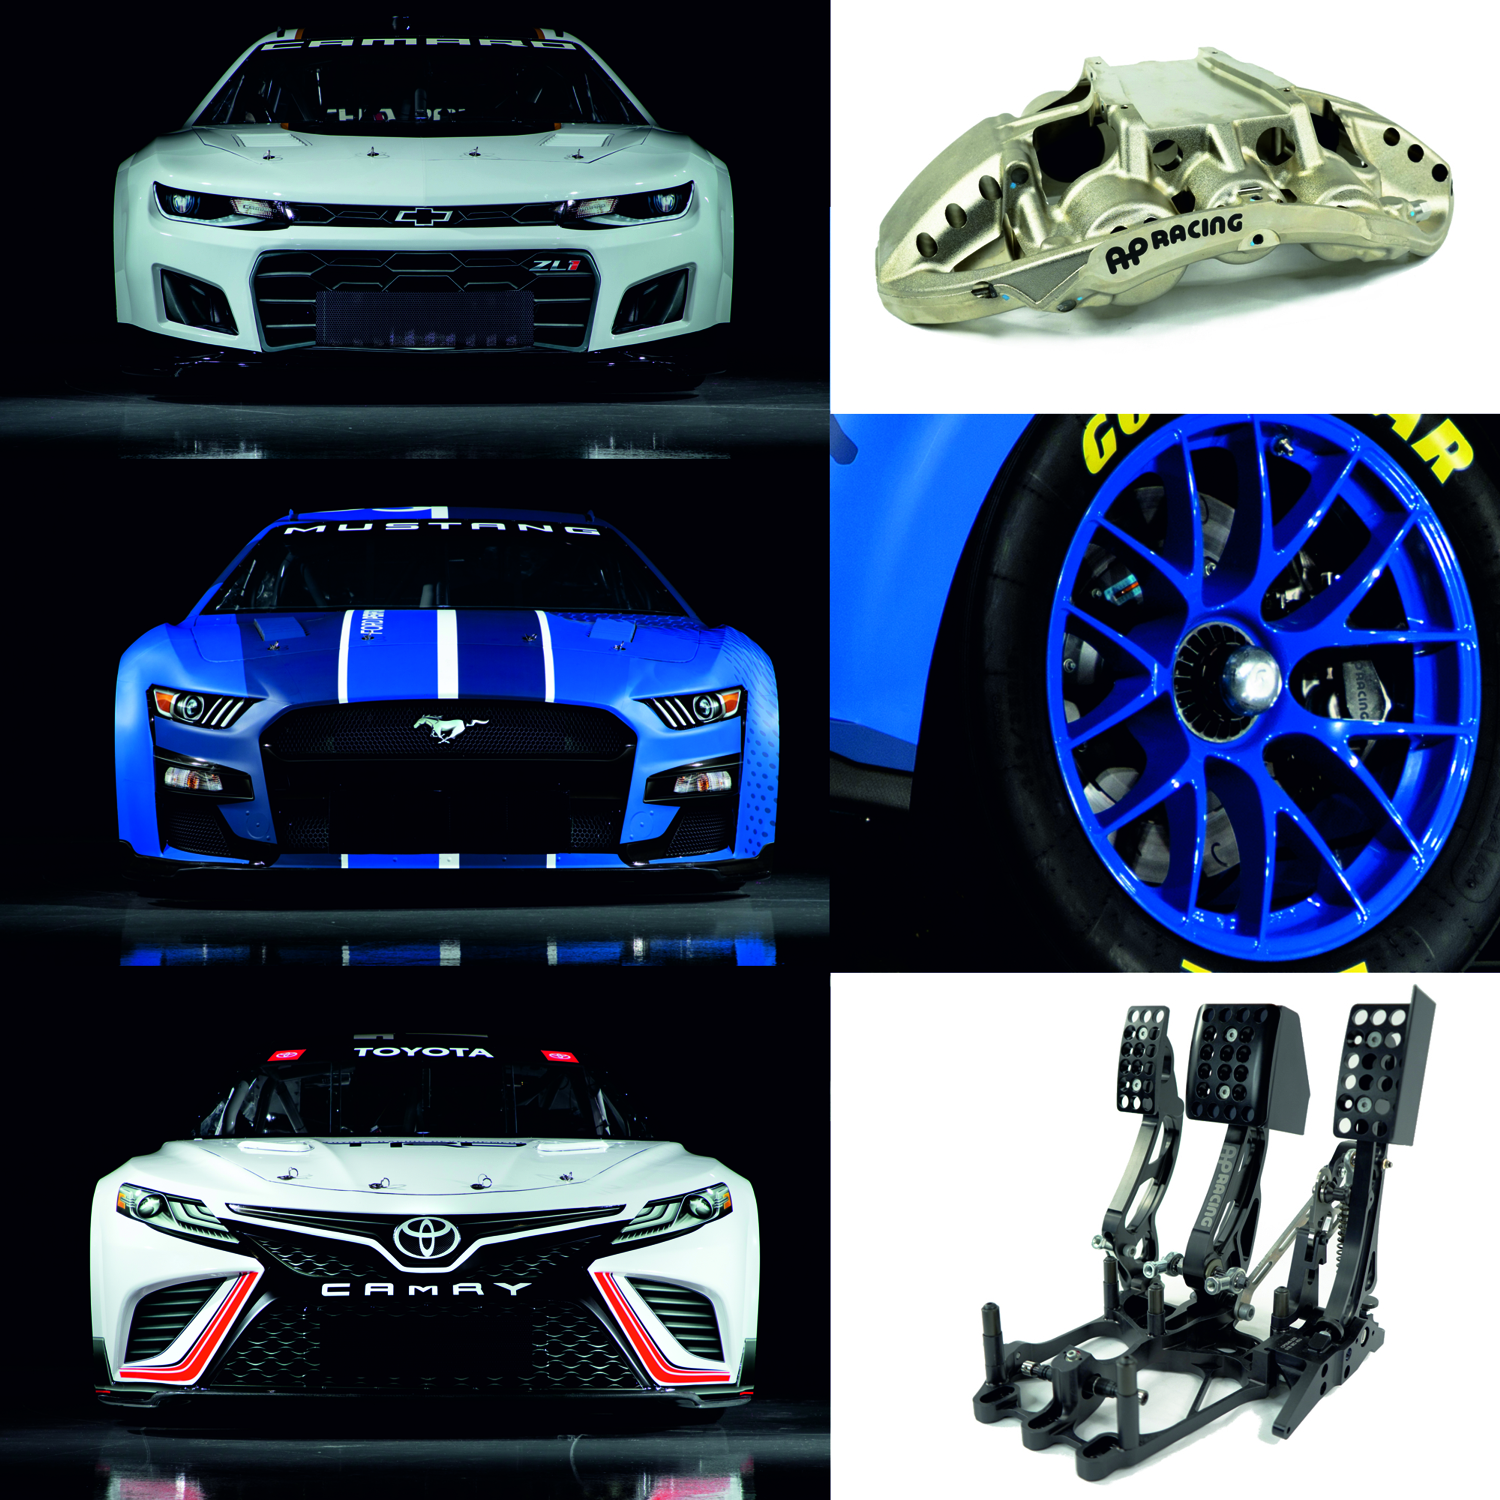 AP Racing appointed sole brake supplier for NASCAR’s Next Gen Cup Car - Featured Image